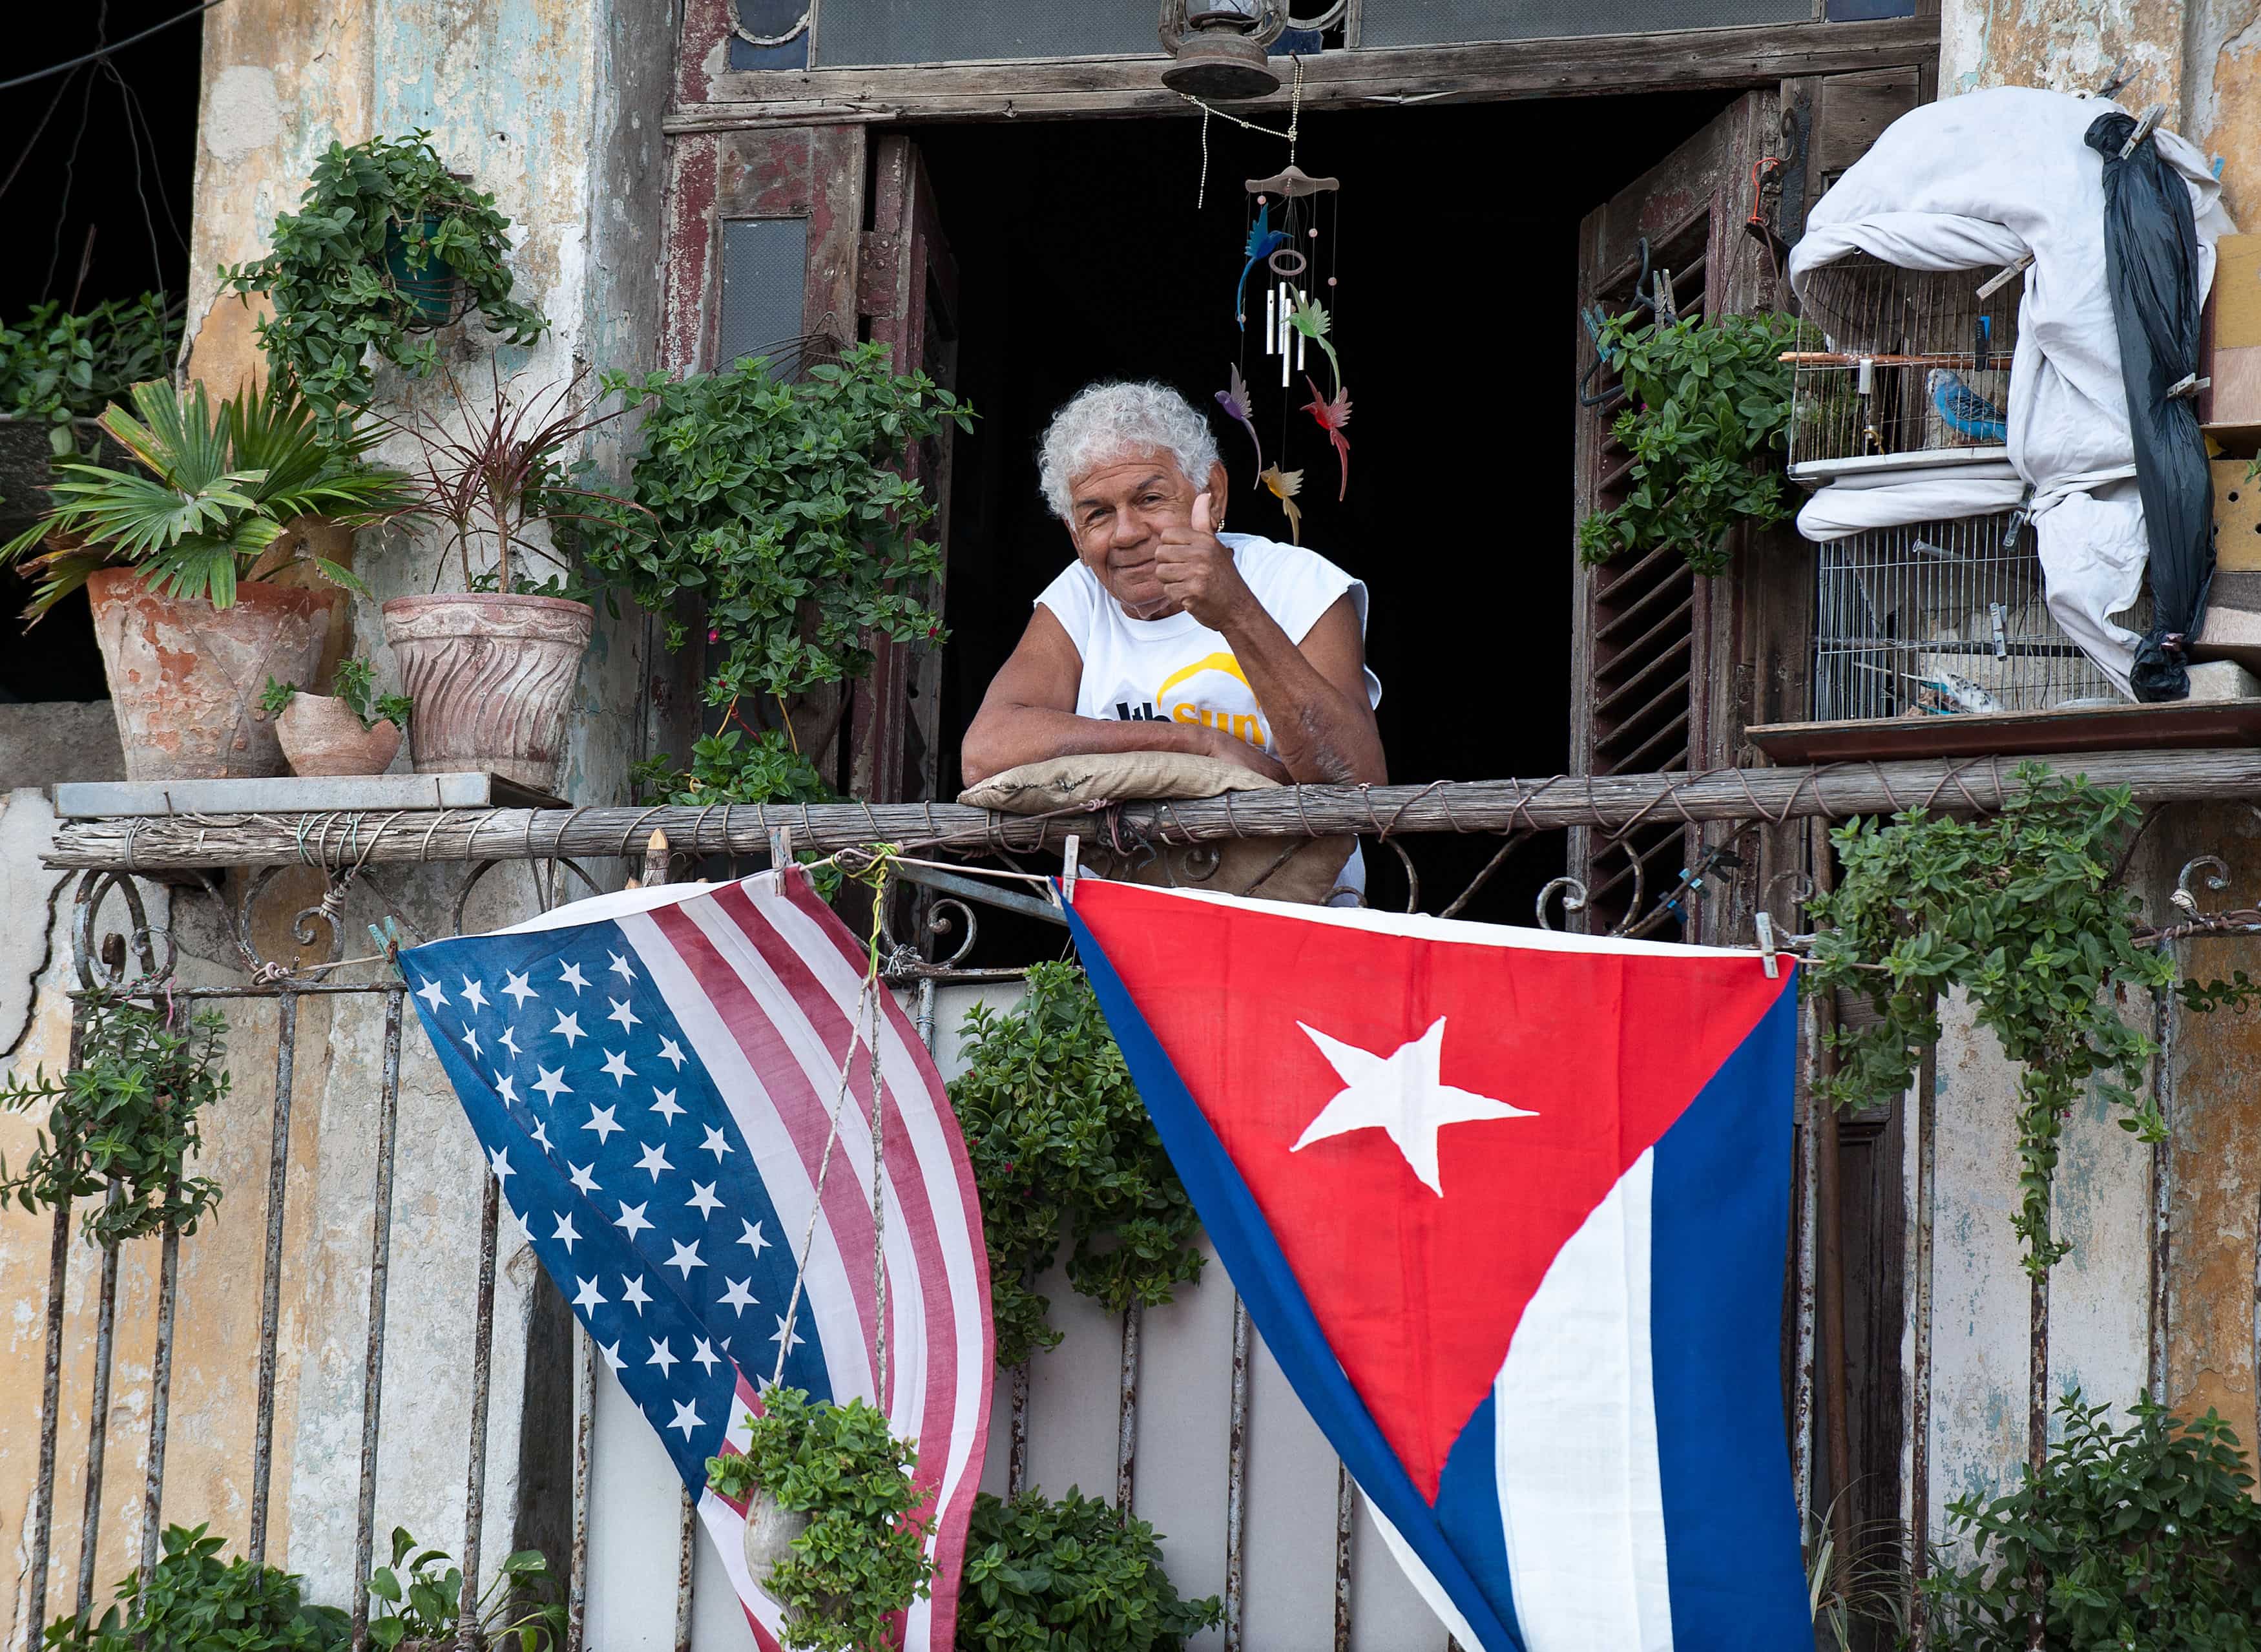 A Cuban gives the thumb's up from his balcony decorated with the U.S. and Cuban flags in Havana, on Jan. 16, 2015. The United States eased travel and trade restrictions with Cuba in January, marking the first concrete steps towards restoring normal ties with the Cold War-era foe since announcing a historic rapprochement.